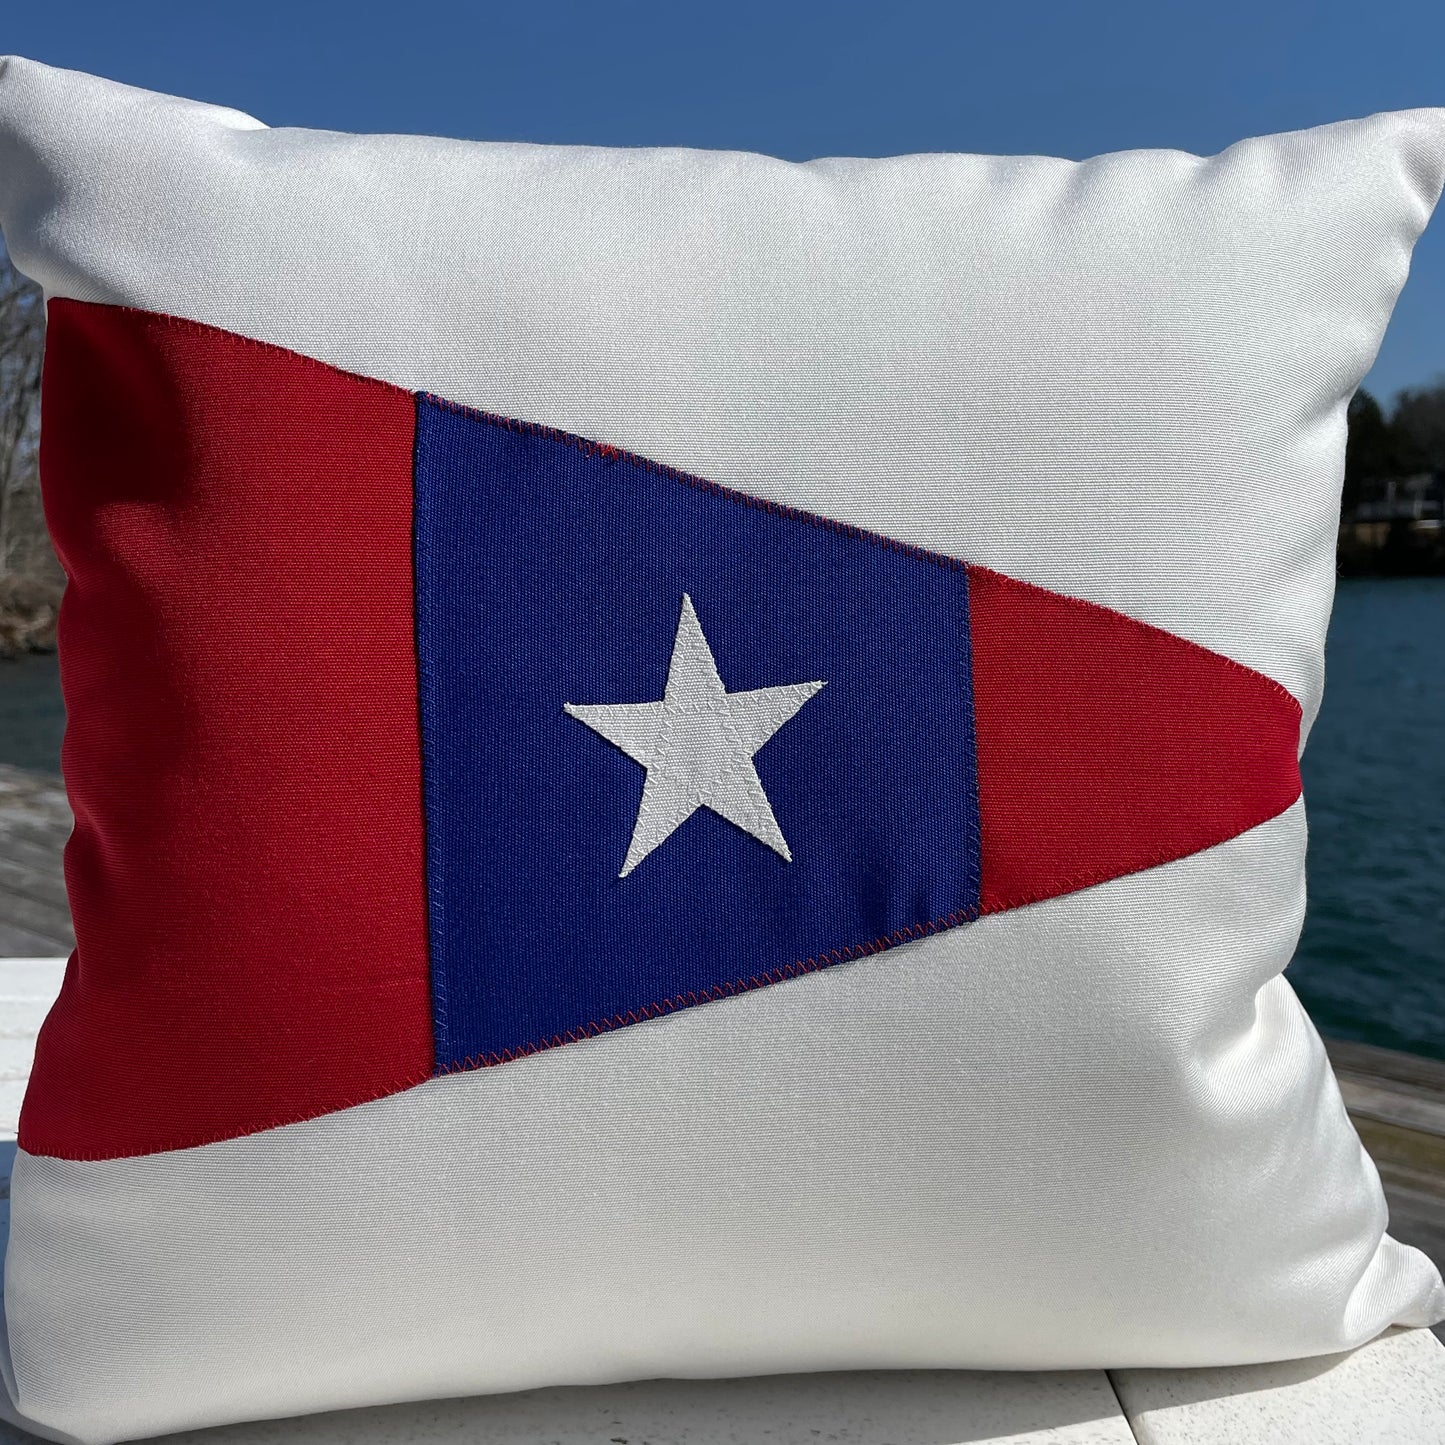 Prouts Neck Yacht Club Pillow